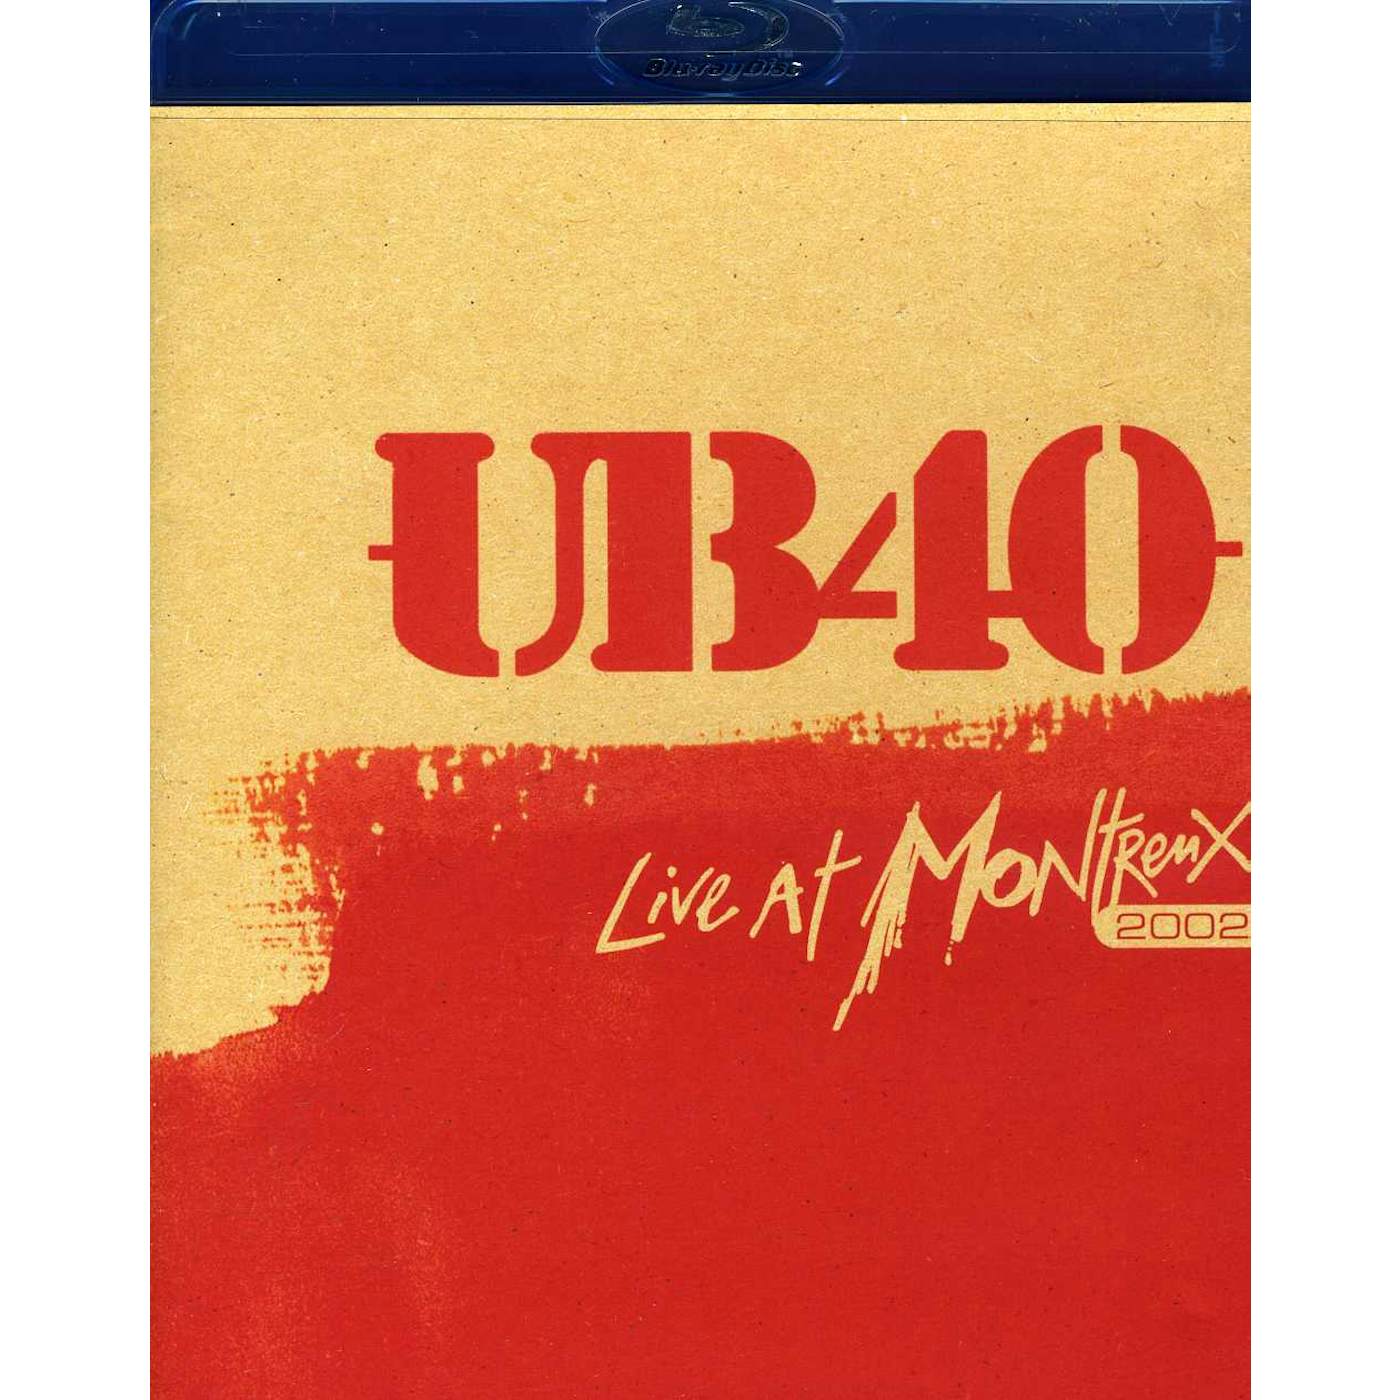 UB40 LIVE AT MONTREUX 2002 Blu-ray